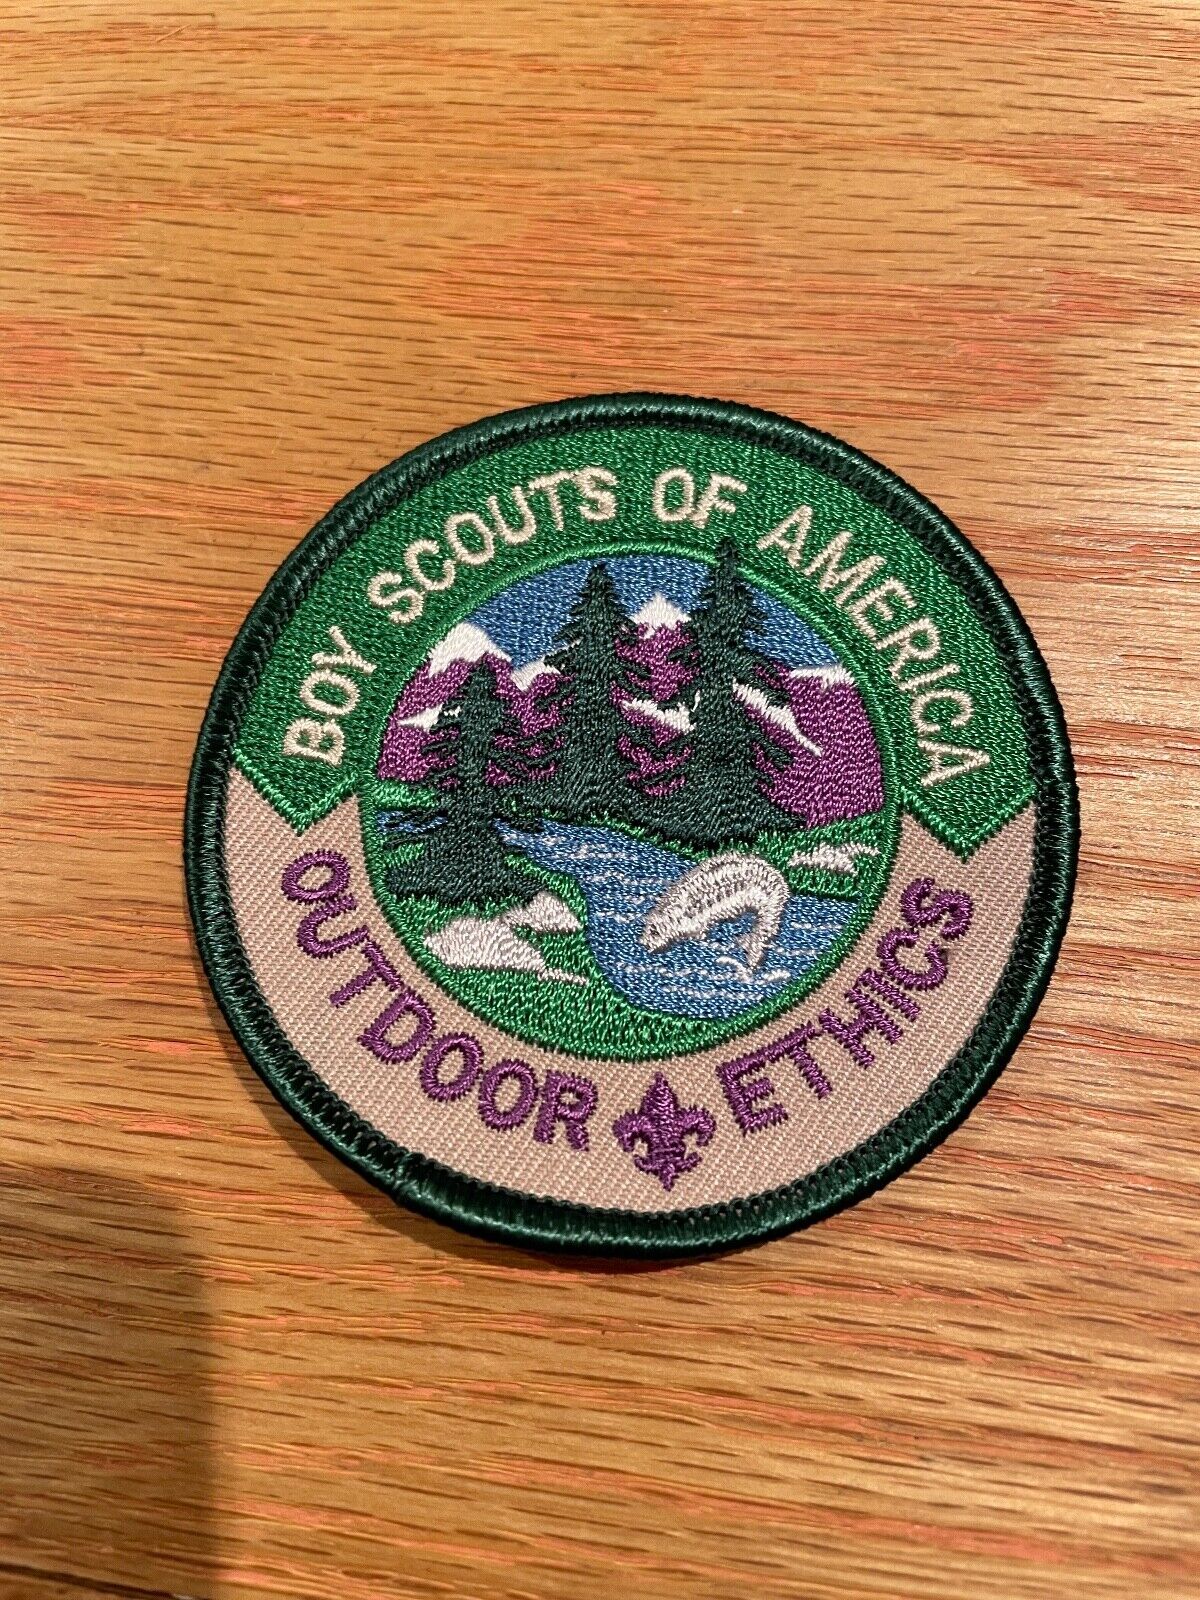 BSA Outdoor Ethics Patch. New.Never attached to uniform